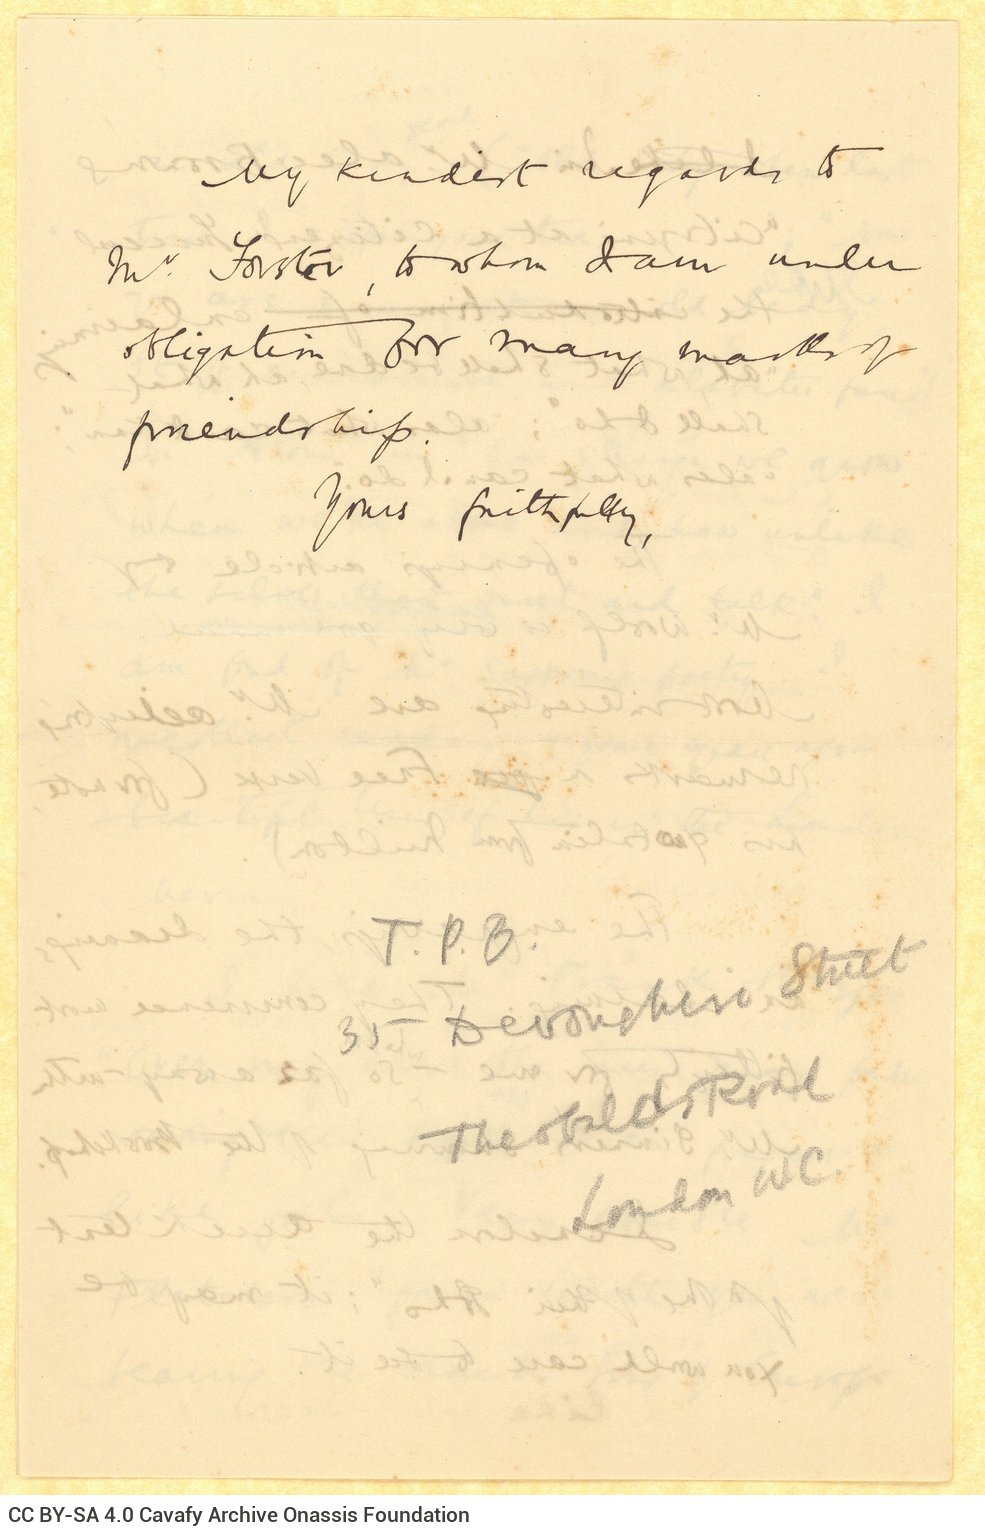 Handwritten draft letter by Cavafy to Harold Edward Monro on all four pages of a bifolio. Cancellations and emendations. He t